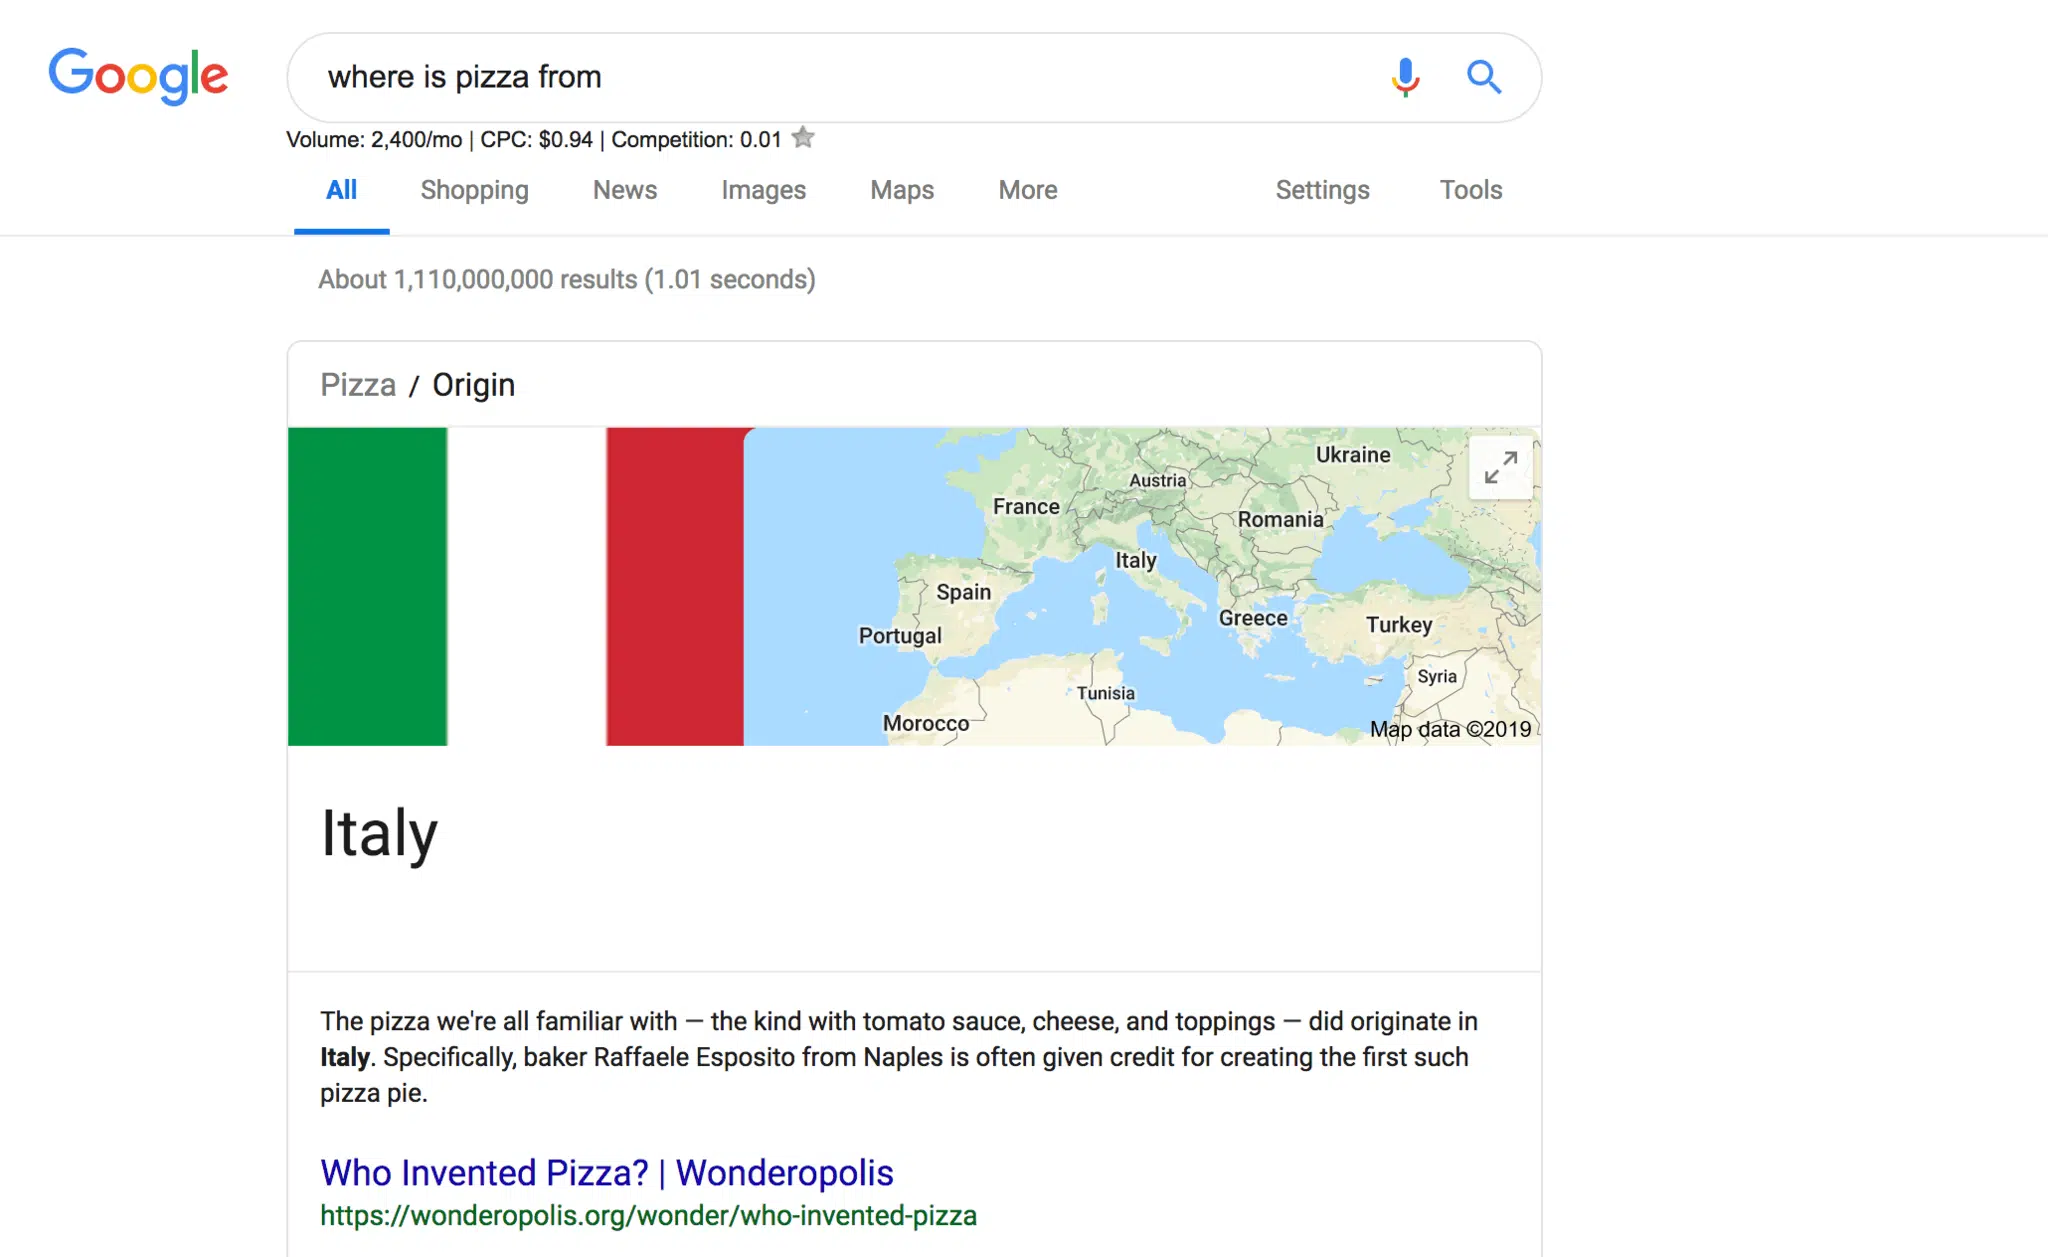 paragraph featured snippet showcasing where pizza is from